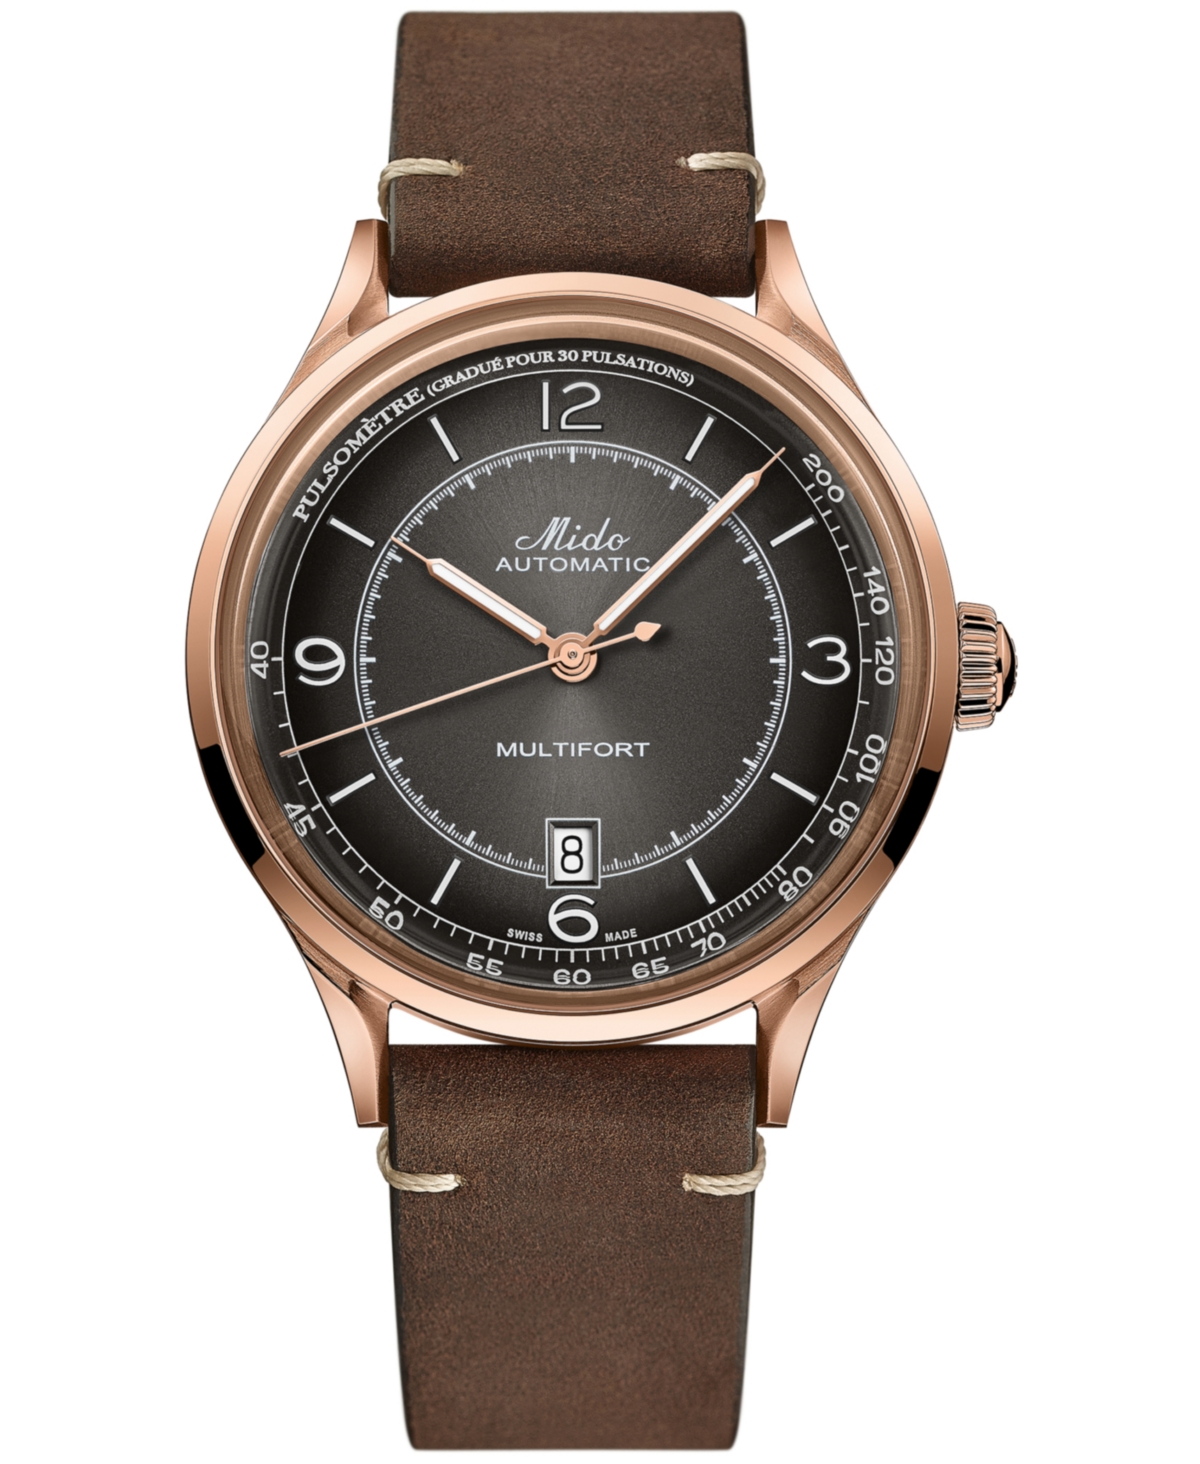 MIDO MEN'S SWISS AUTOMATIC MULTIFORT PATRIMONY PULSOMETER BROWN LEATHER STRAP WATCH 40MM